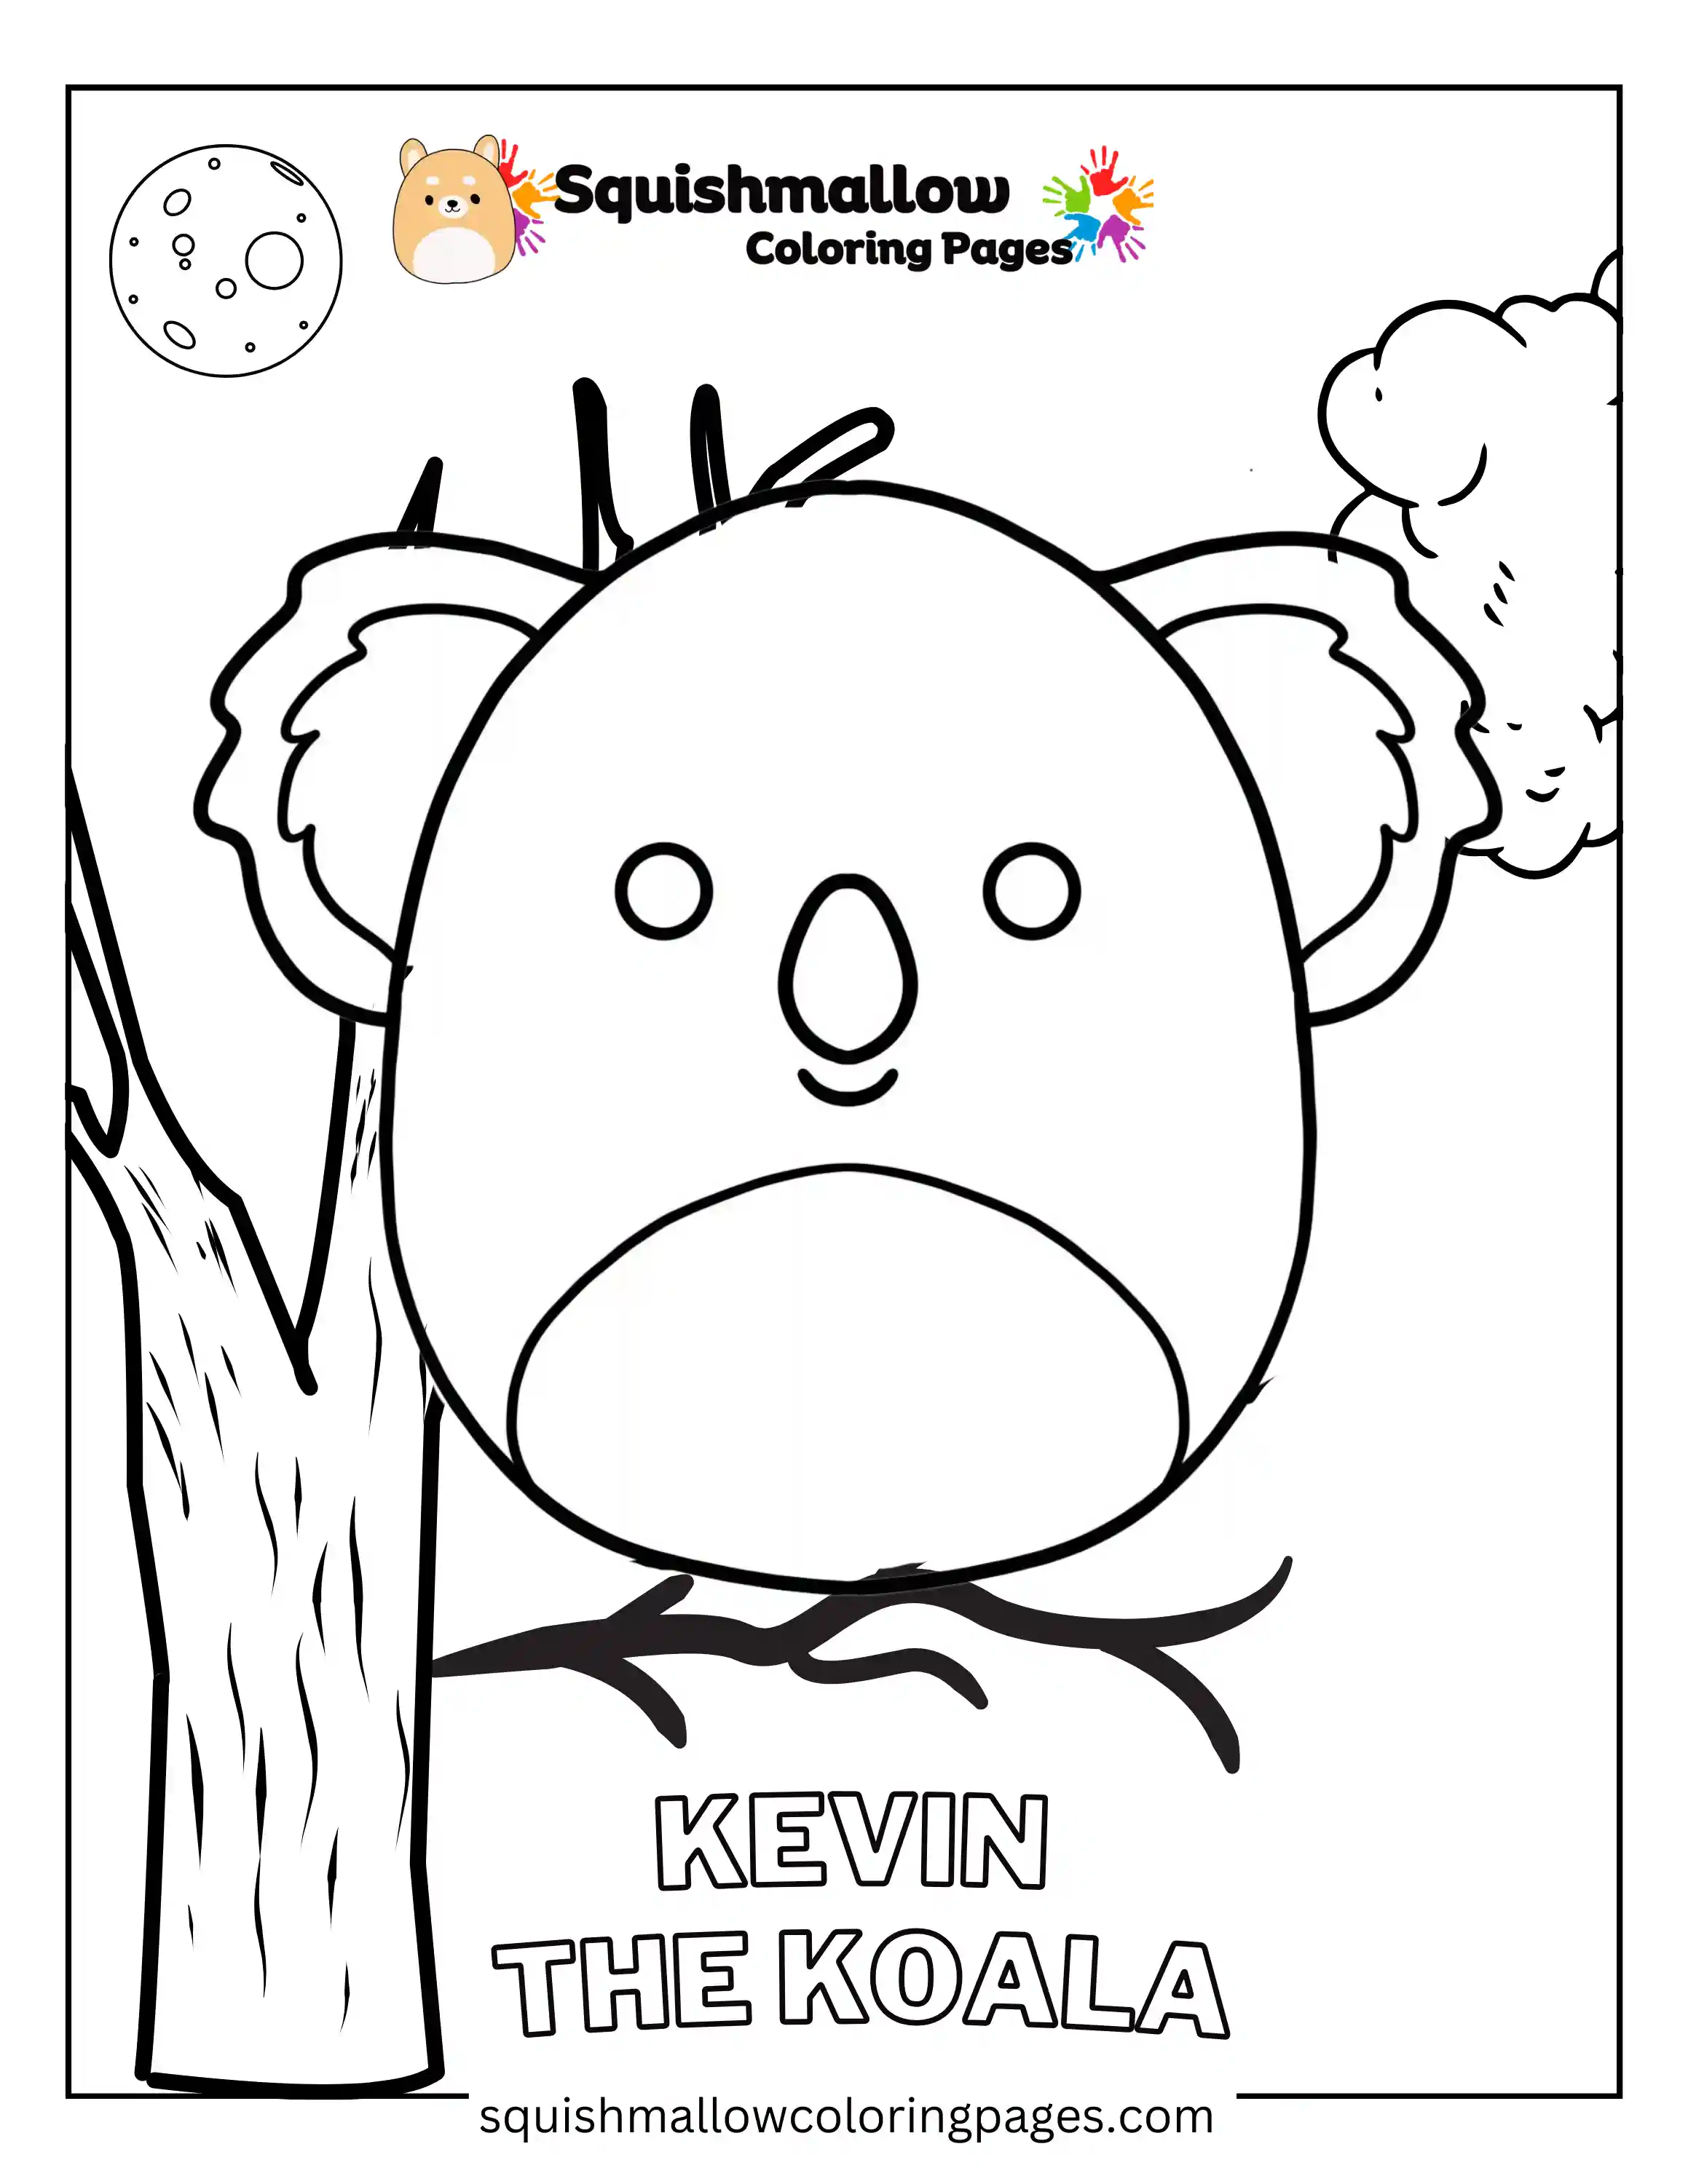 Kevin The Koala Squishmallow Coloring Page